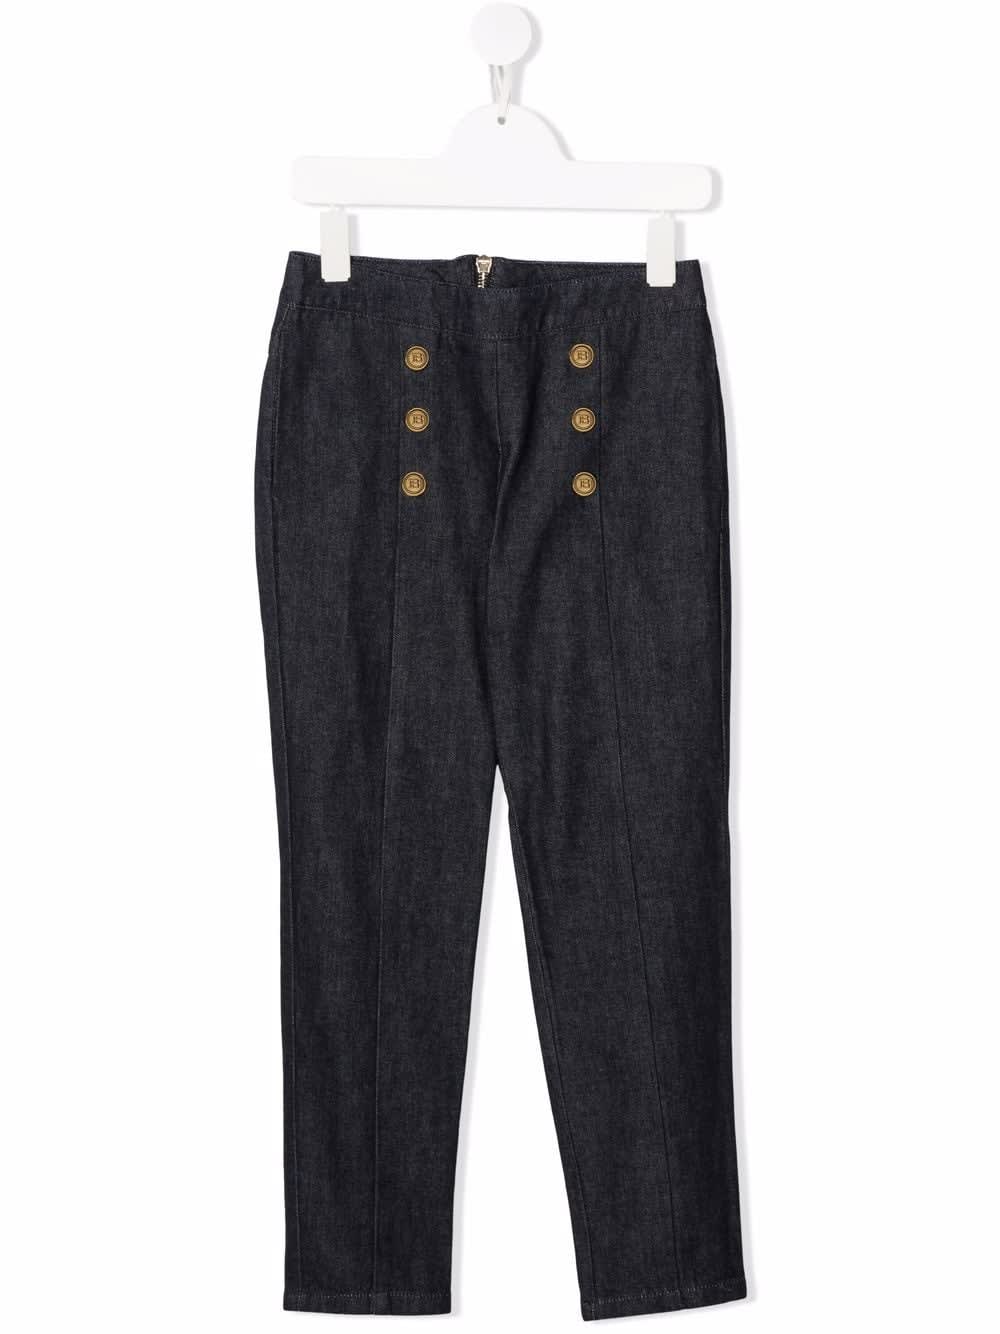 Balmain Navy Blue Kids Tapered Trousers With Golden Embossed Buttons